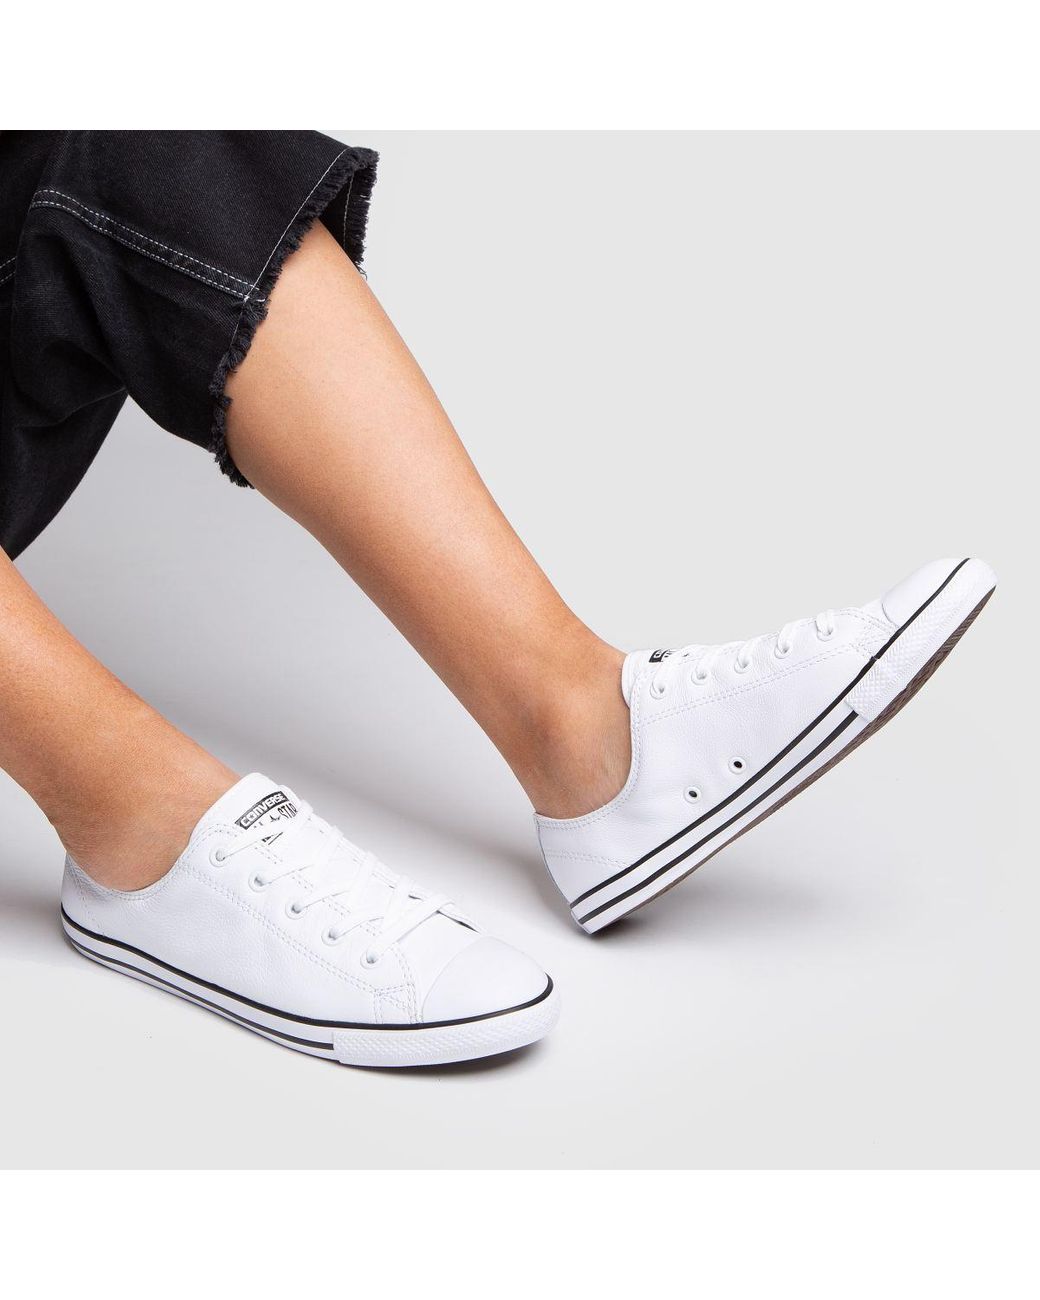 Vista alto Prevalecer Converse All Star Dainty Leather Trainers in White | Lyst UK